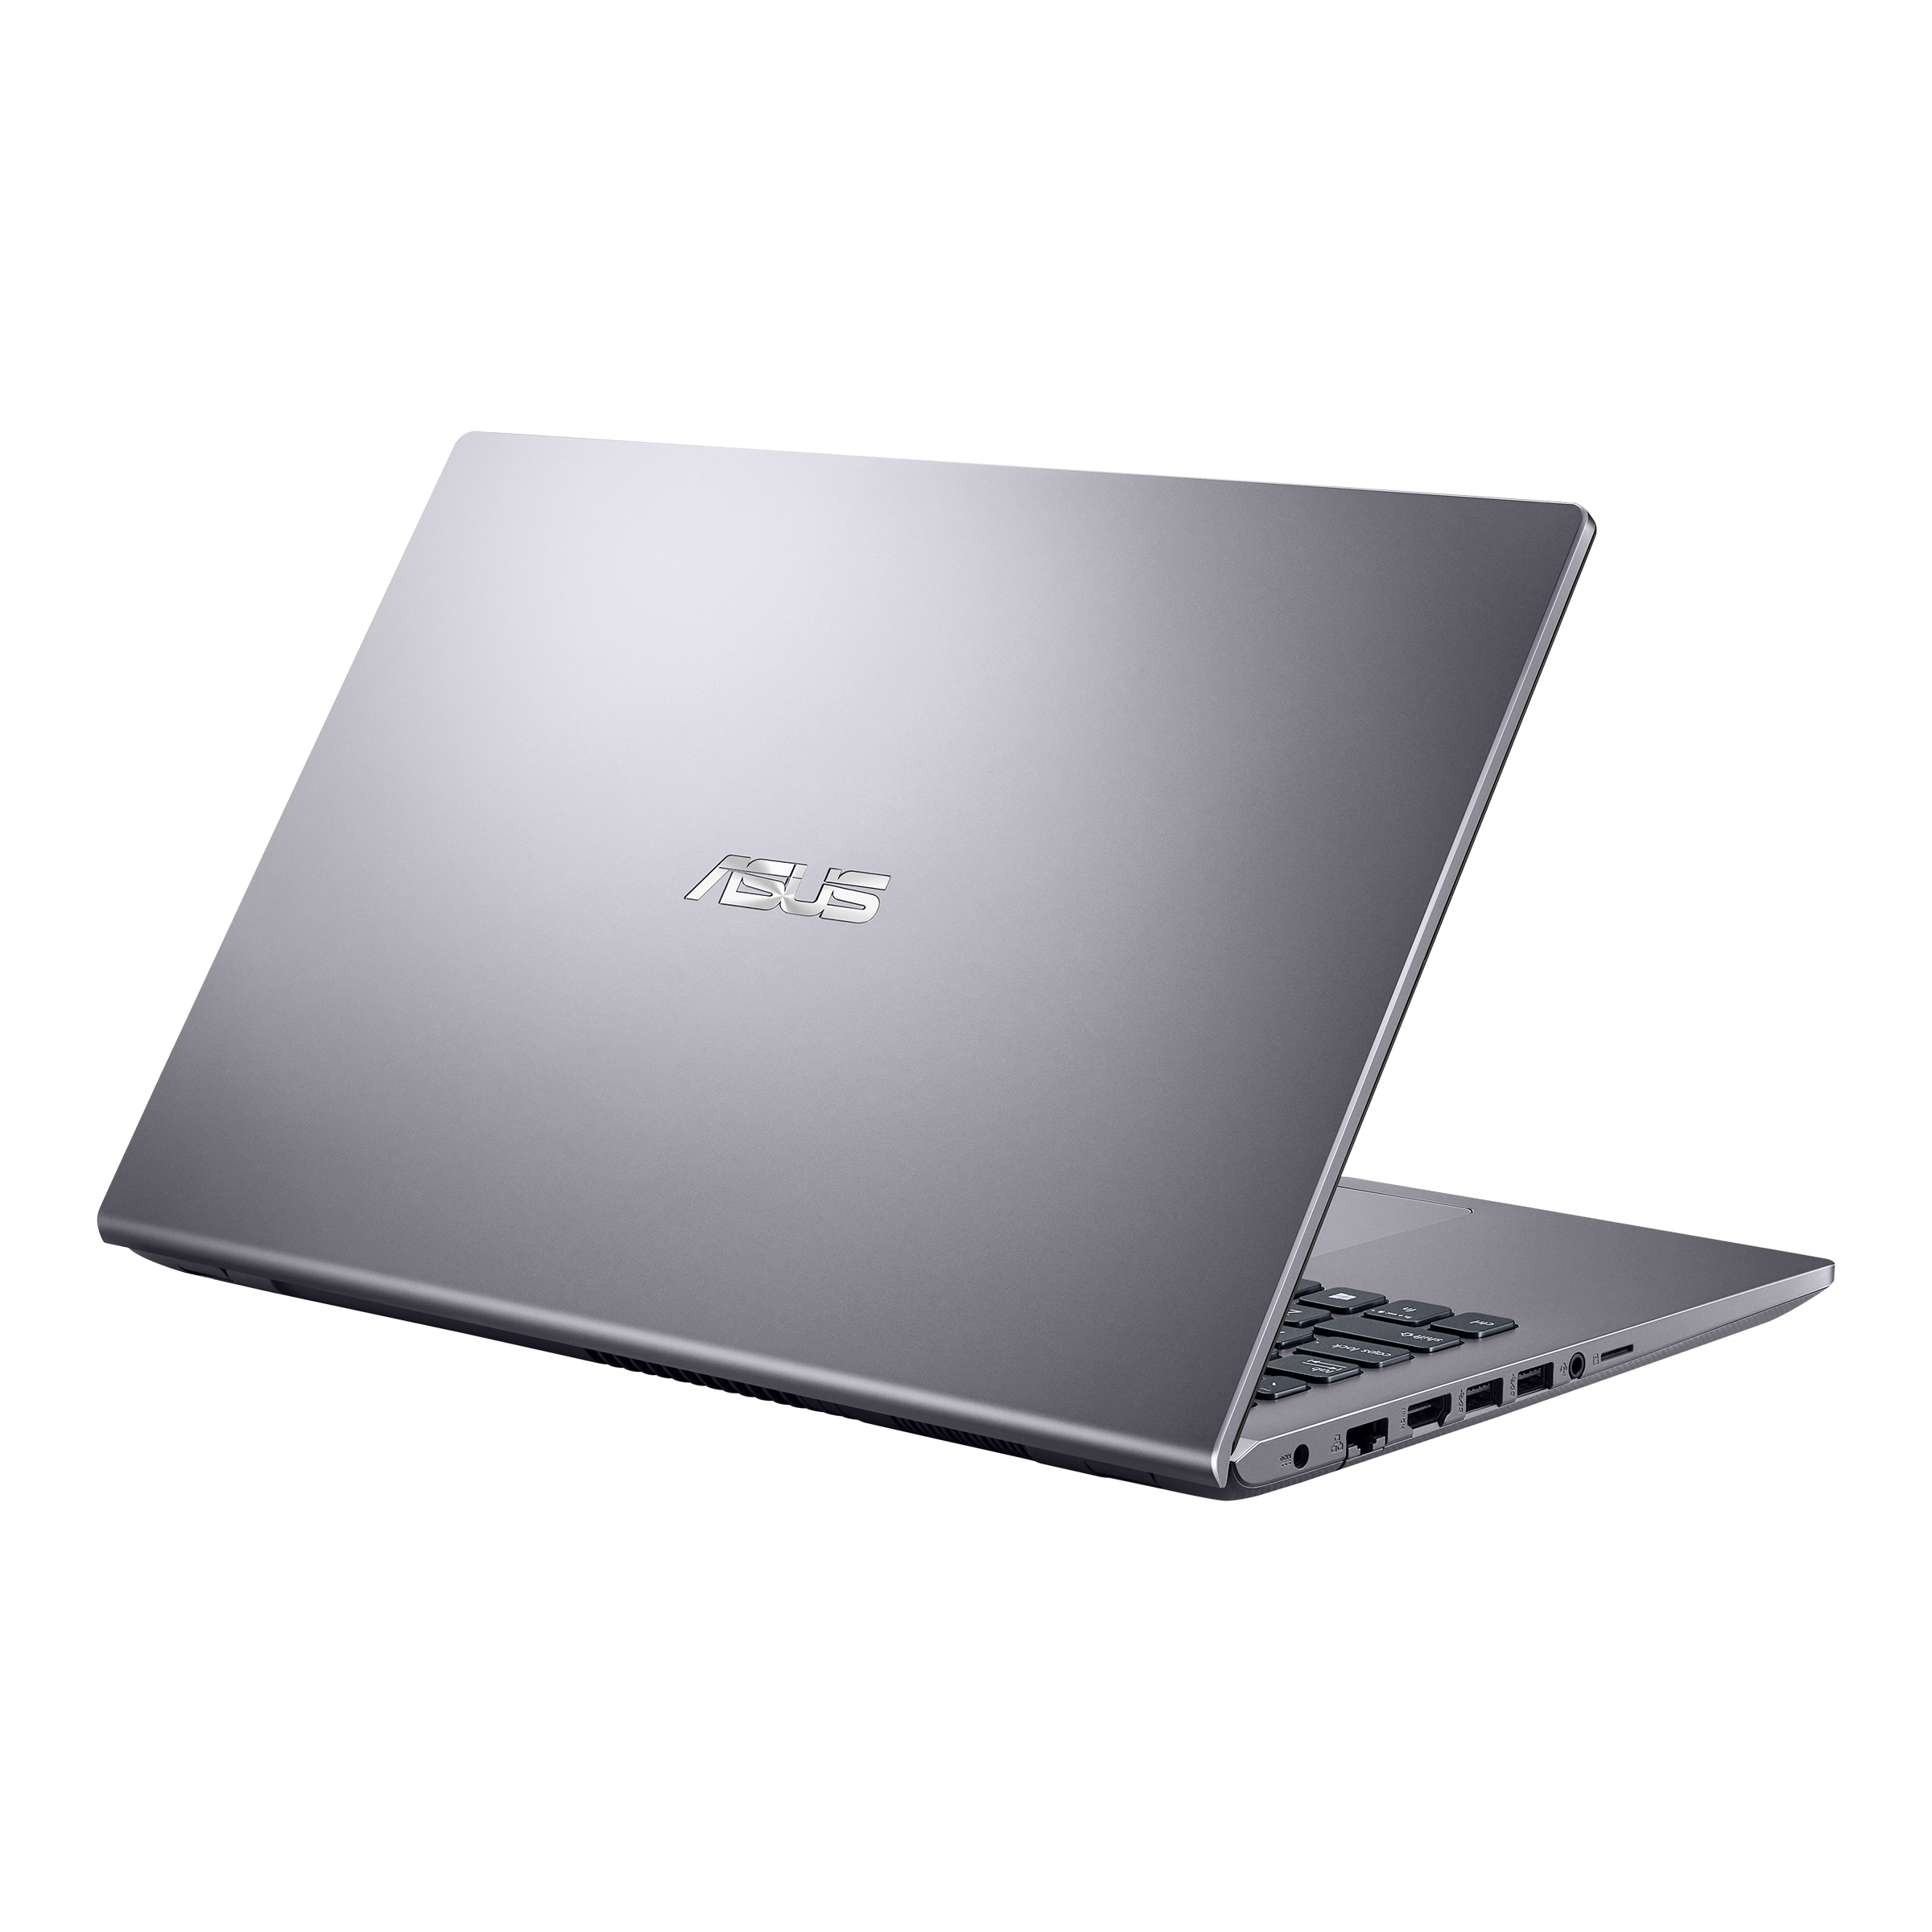 ASUS X545｜Laptops For Home｜ASUS Global